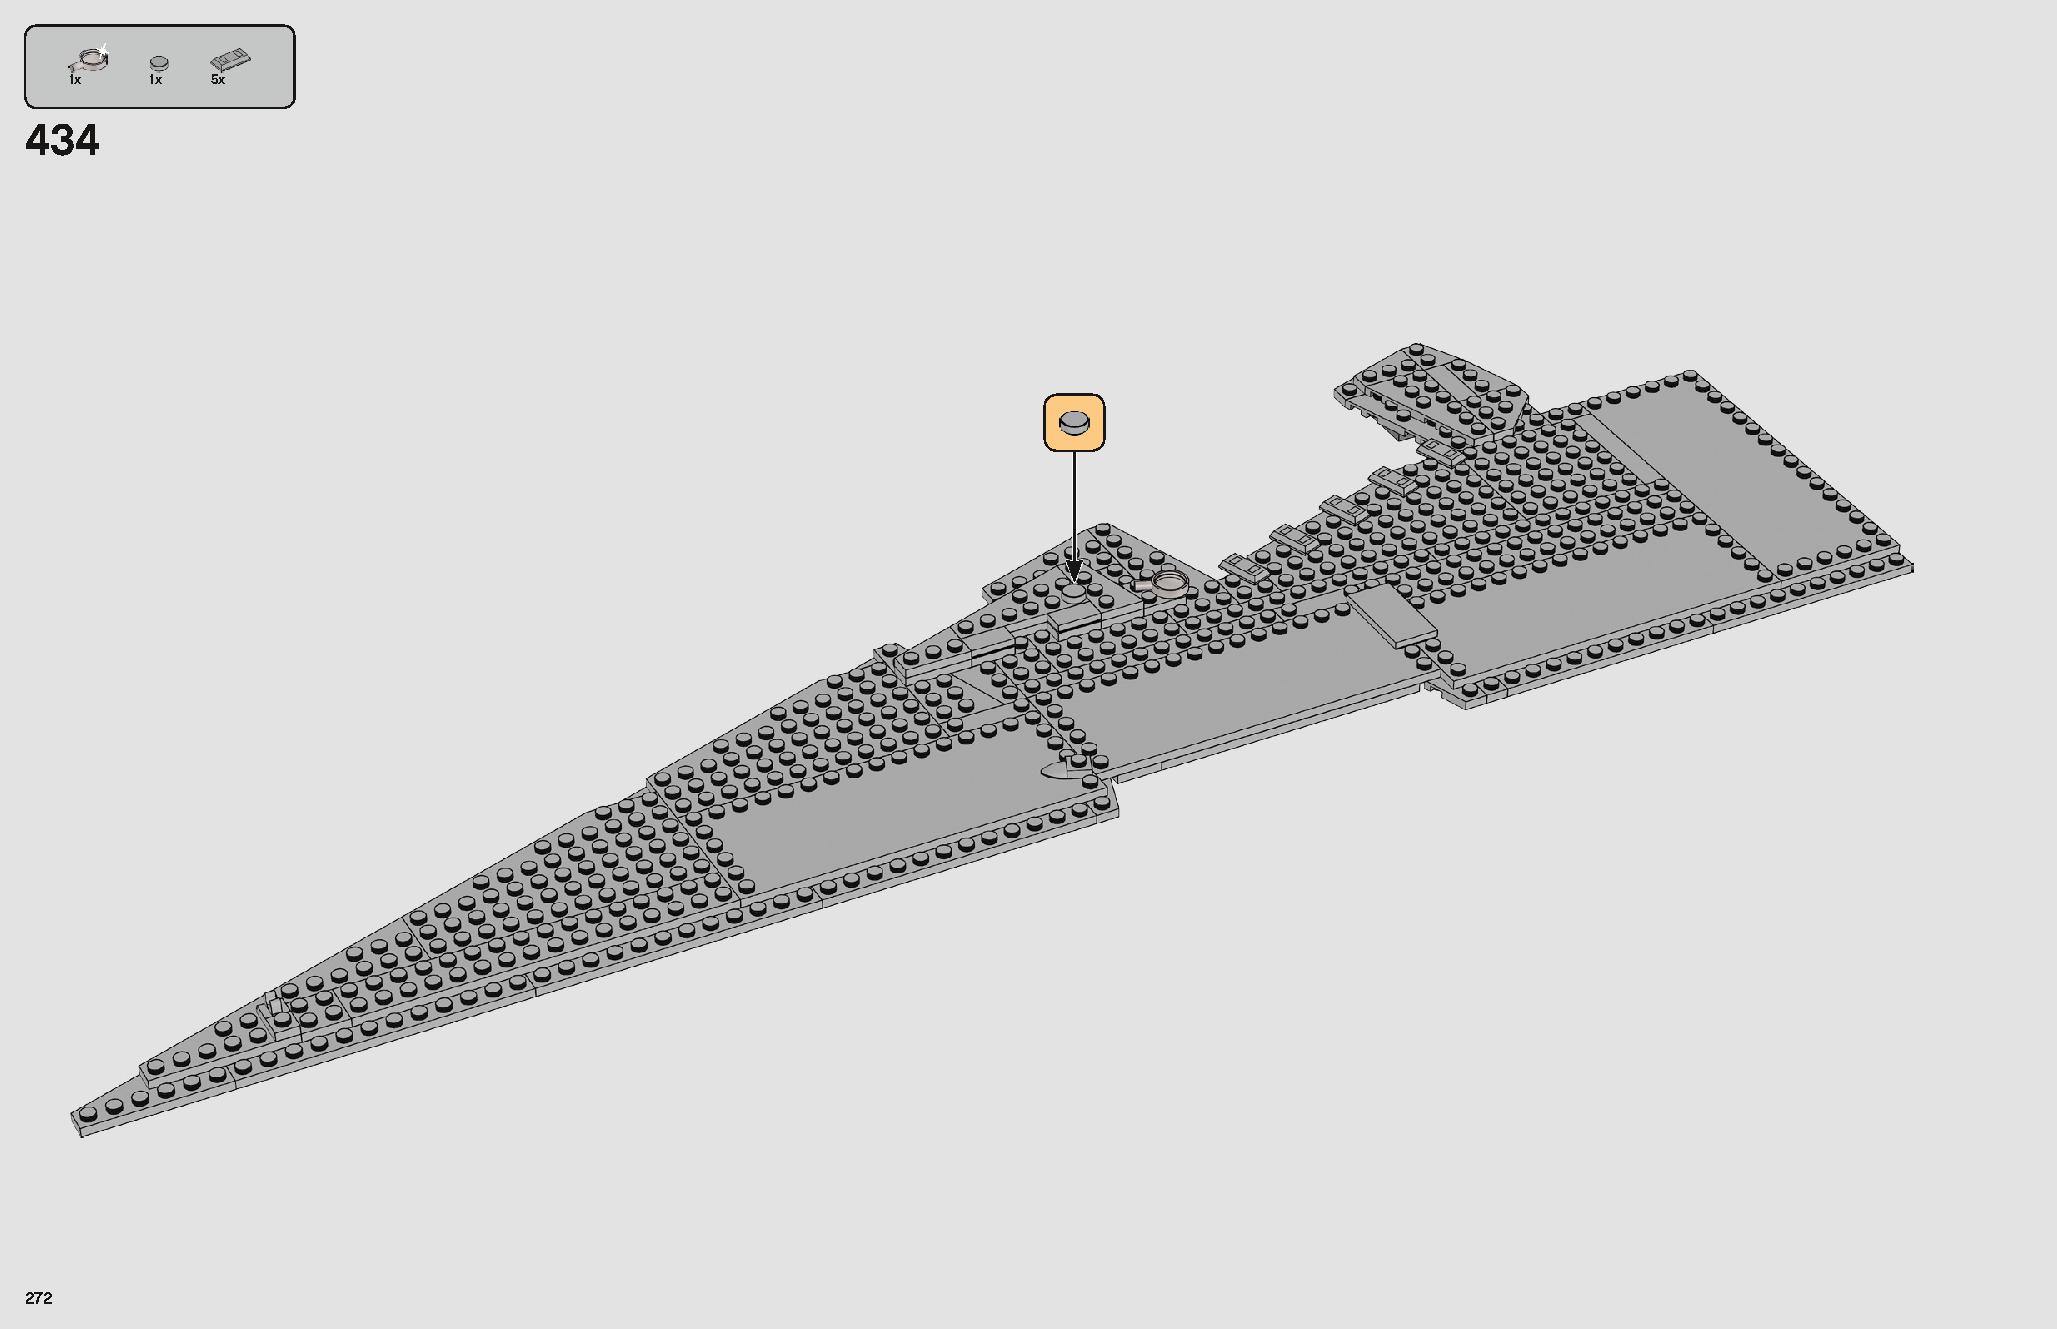 Imperial Star Destroyer 75252 LEGO information LEGO instructions 272 page